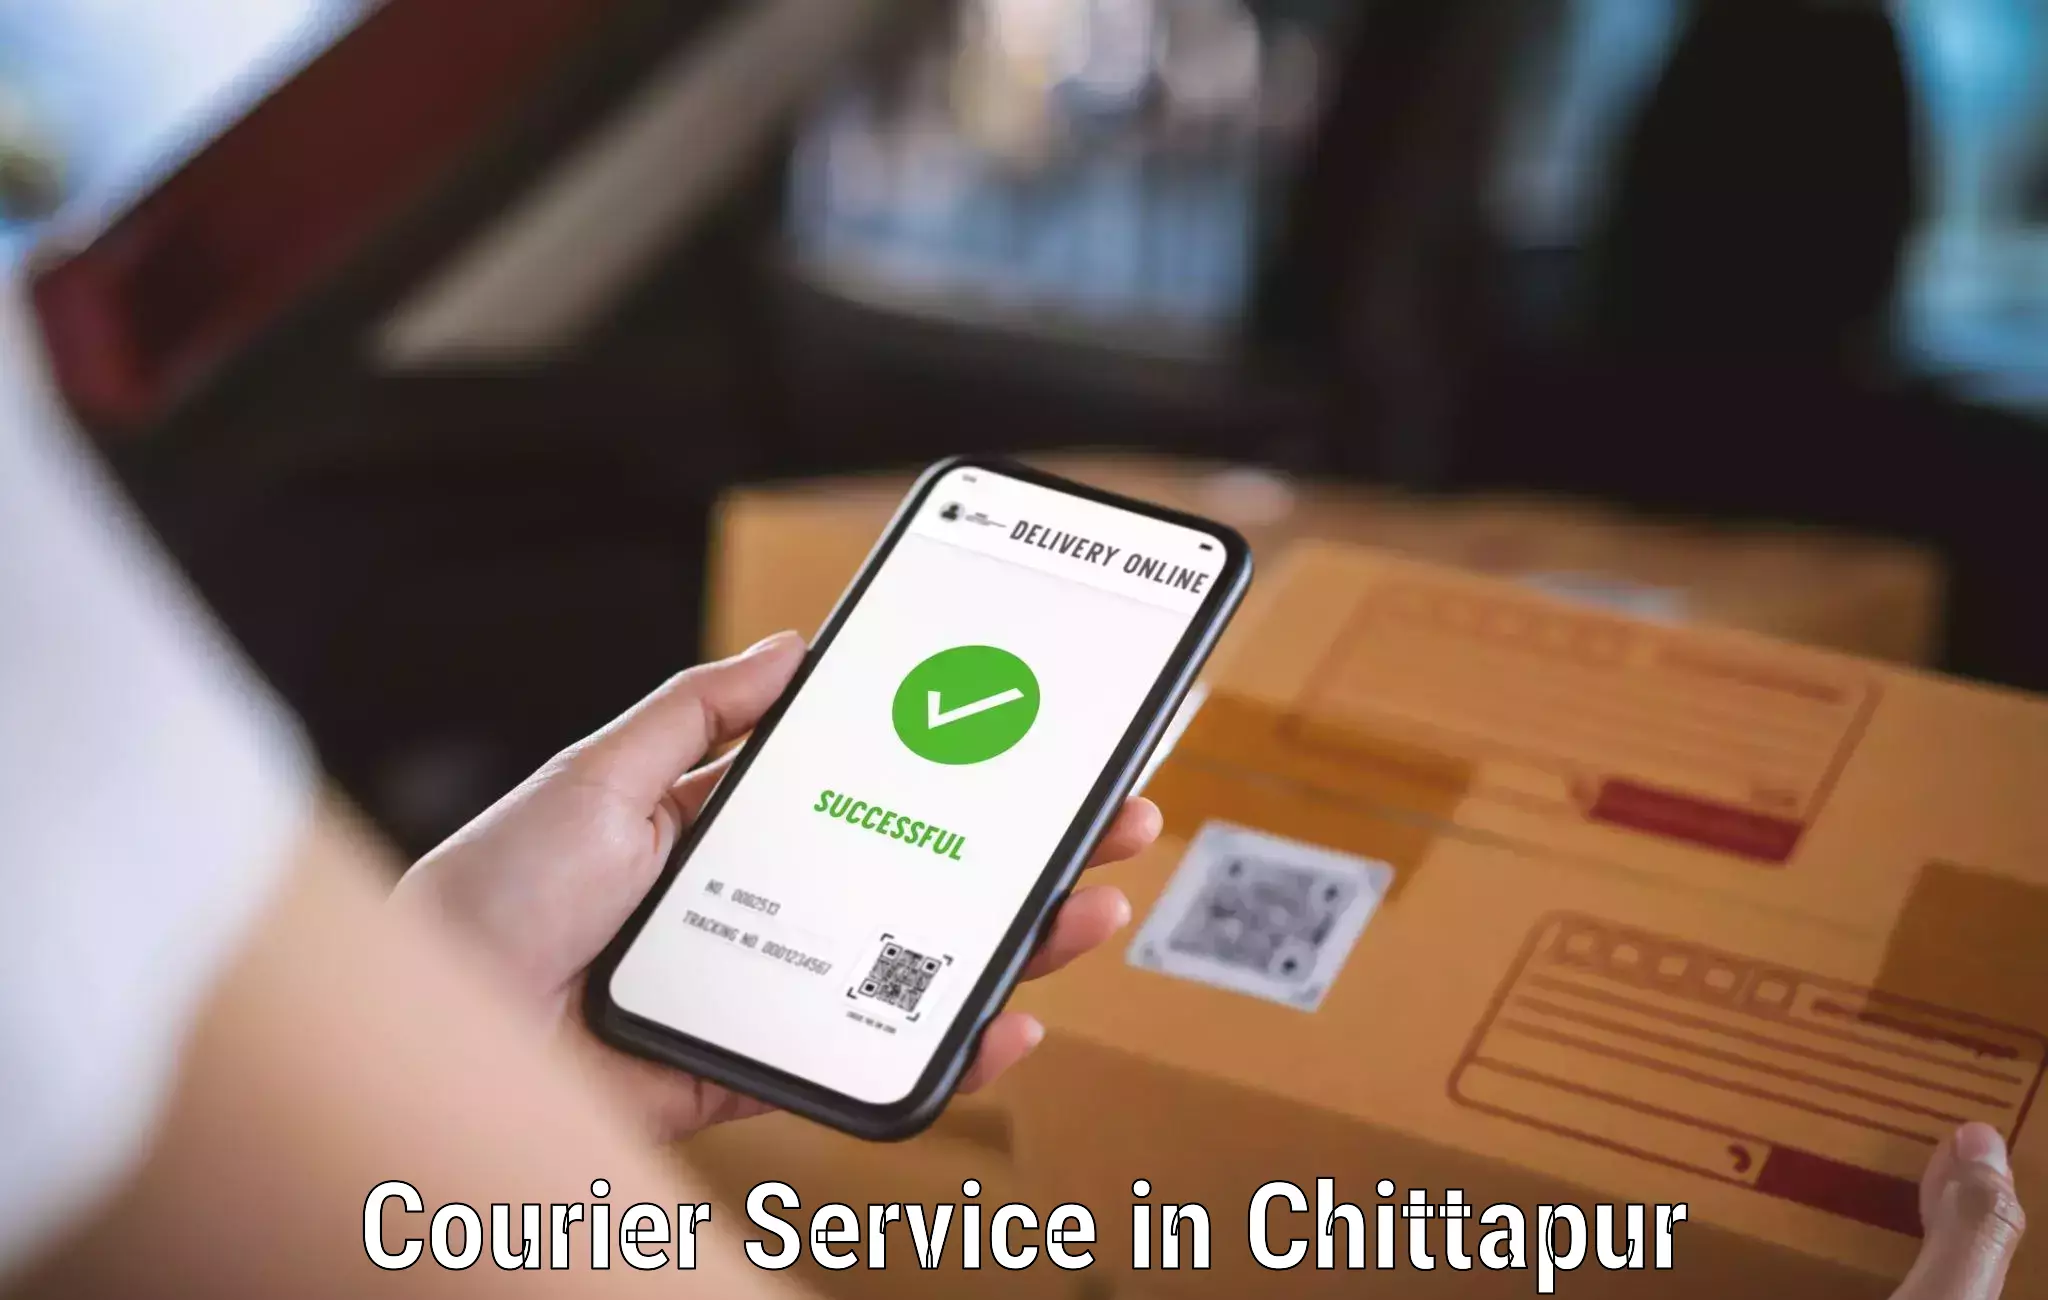 Affordable parcel service in Chittapur